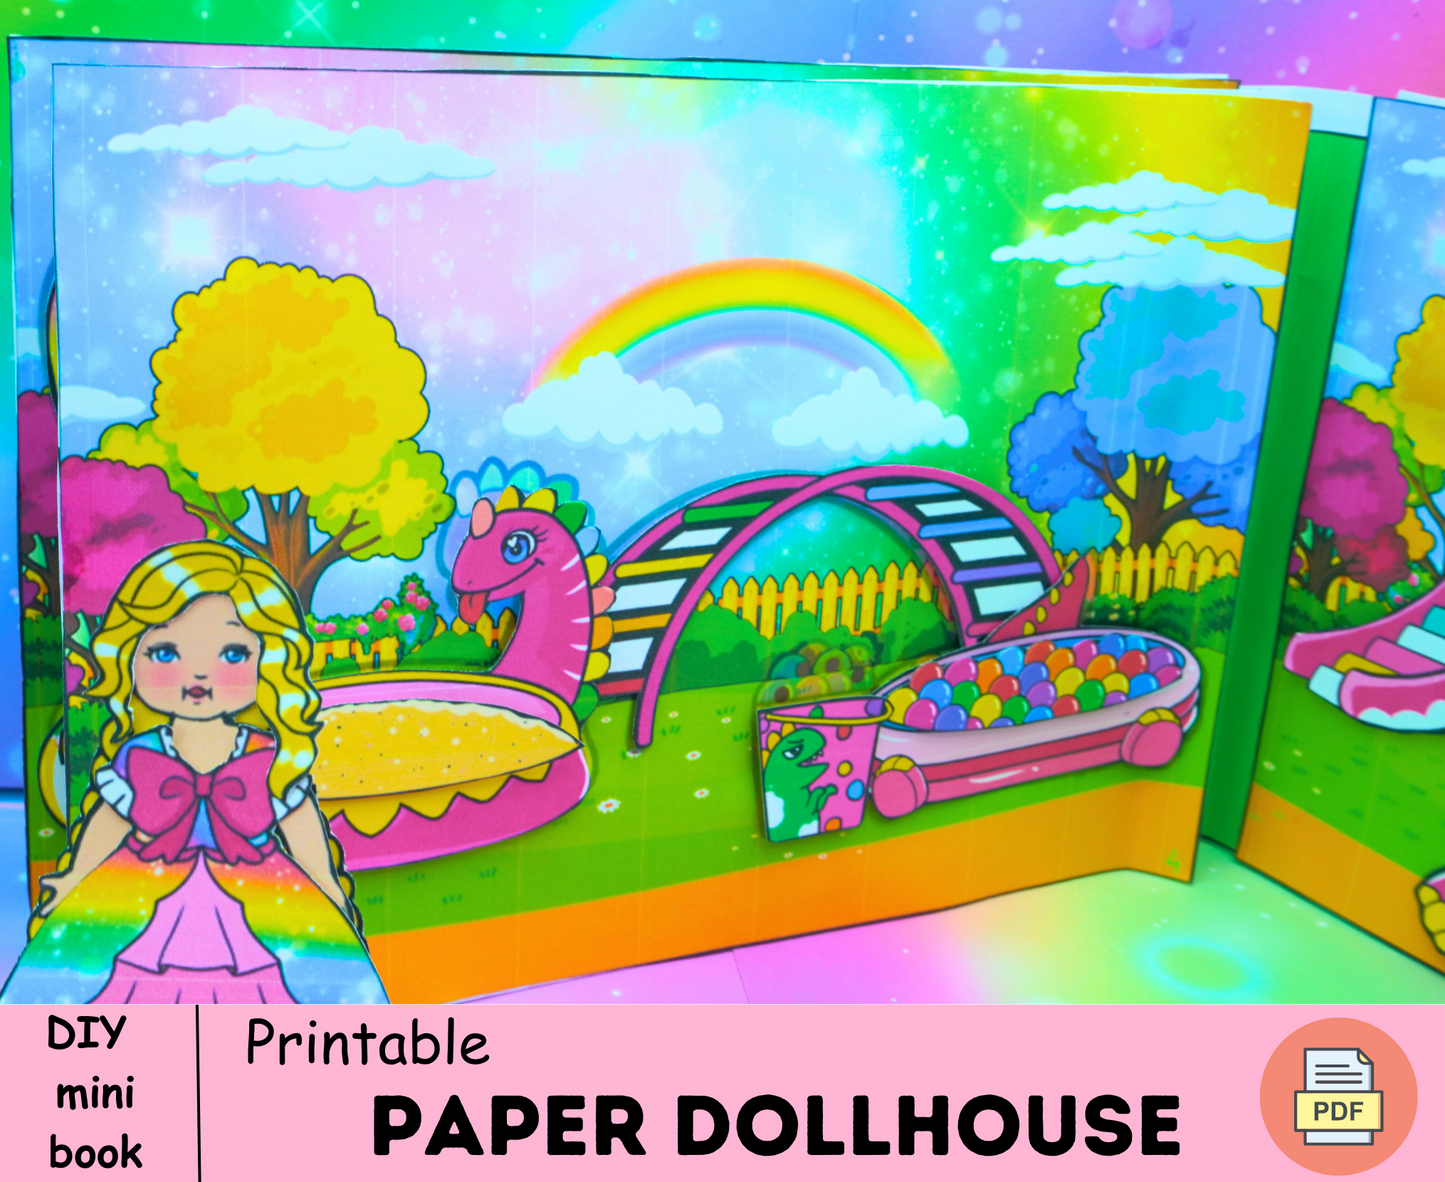 Barbie dinosaur park printables 🦖 DIY kit for your little one - Paper doll house - Activity book for kids 🦖 Woa Doll Crafts